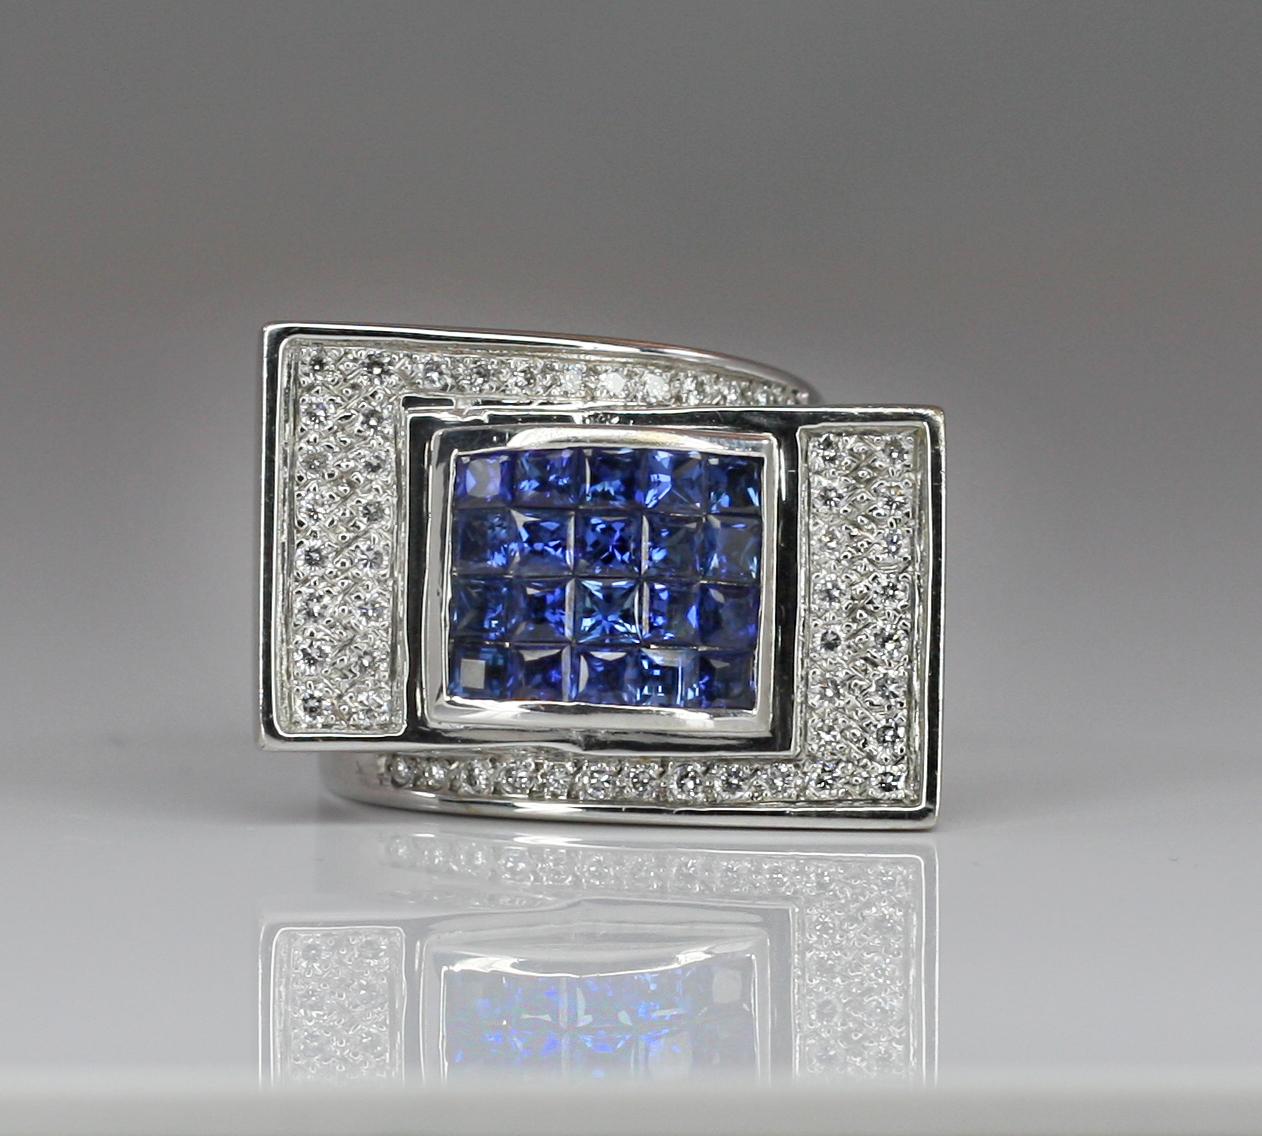 This S.Georgios designer Ring is all hand-made and heavy 18 Karat White Gold Wide Band. The gorgeous piece features 20 stunning Princess cut natural blue Sapphires total weight 2.49 Carat set in an invisible setting, and surrounded by natural